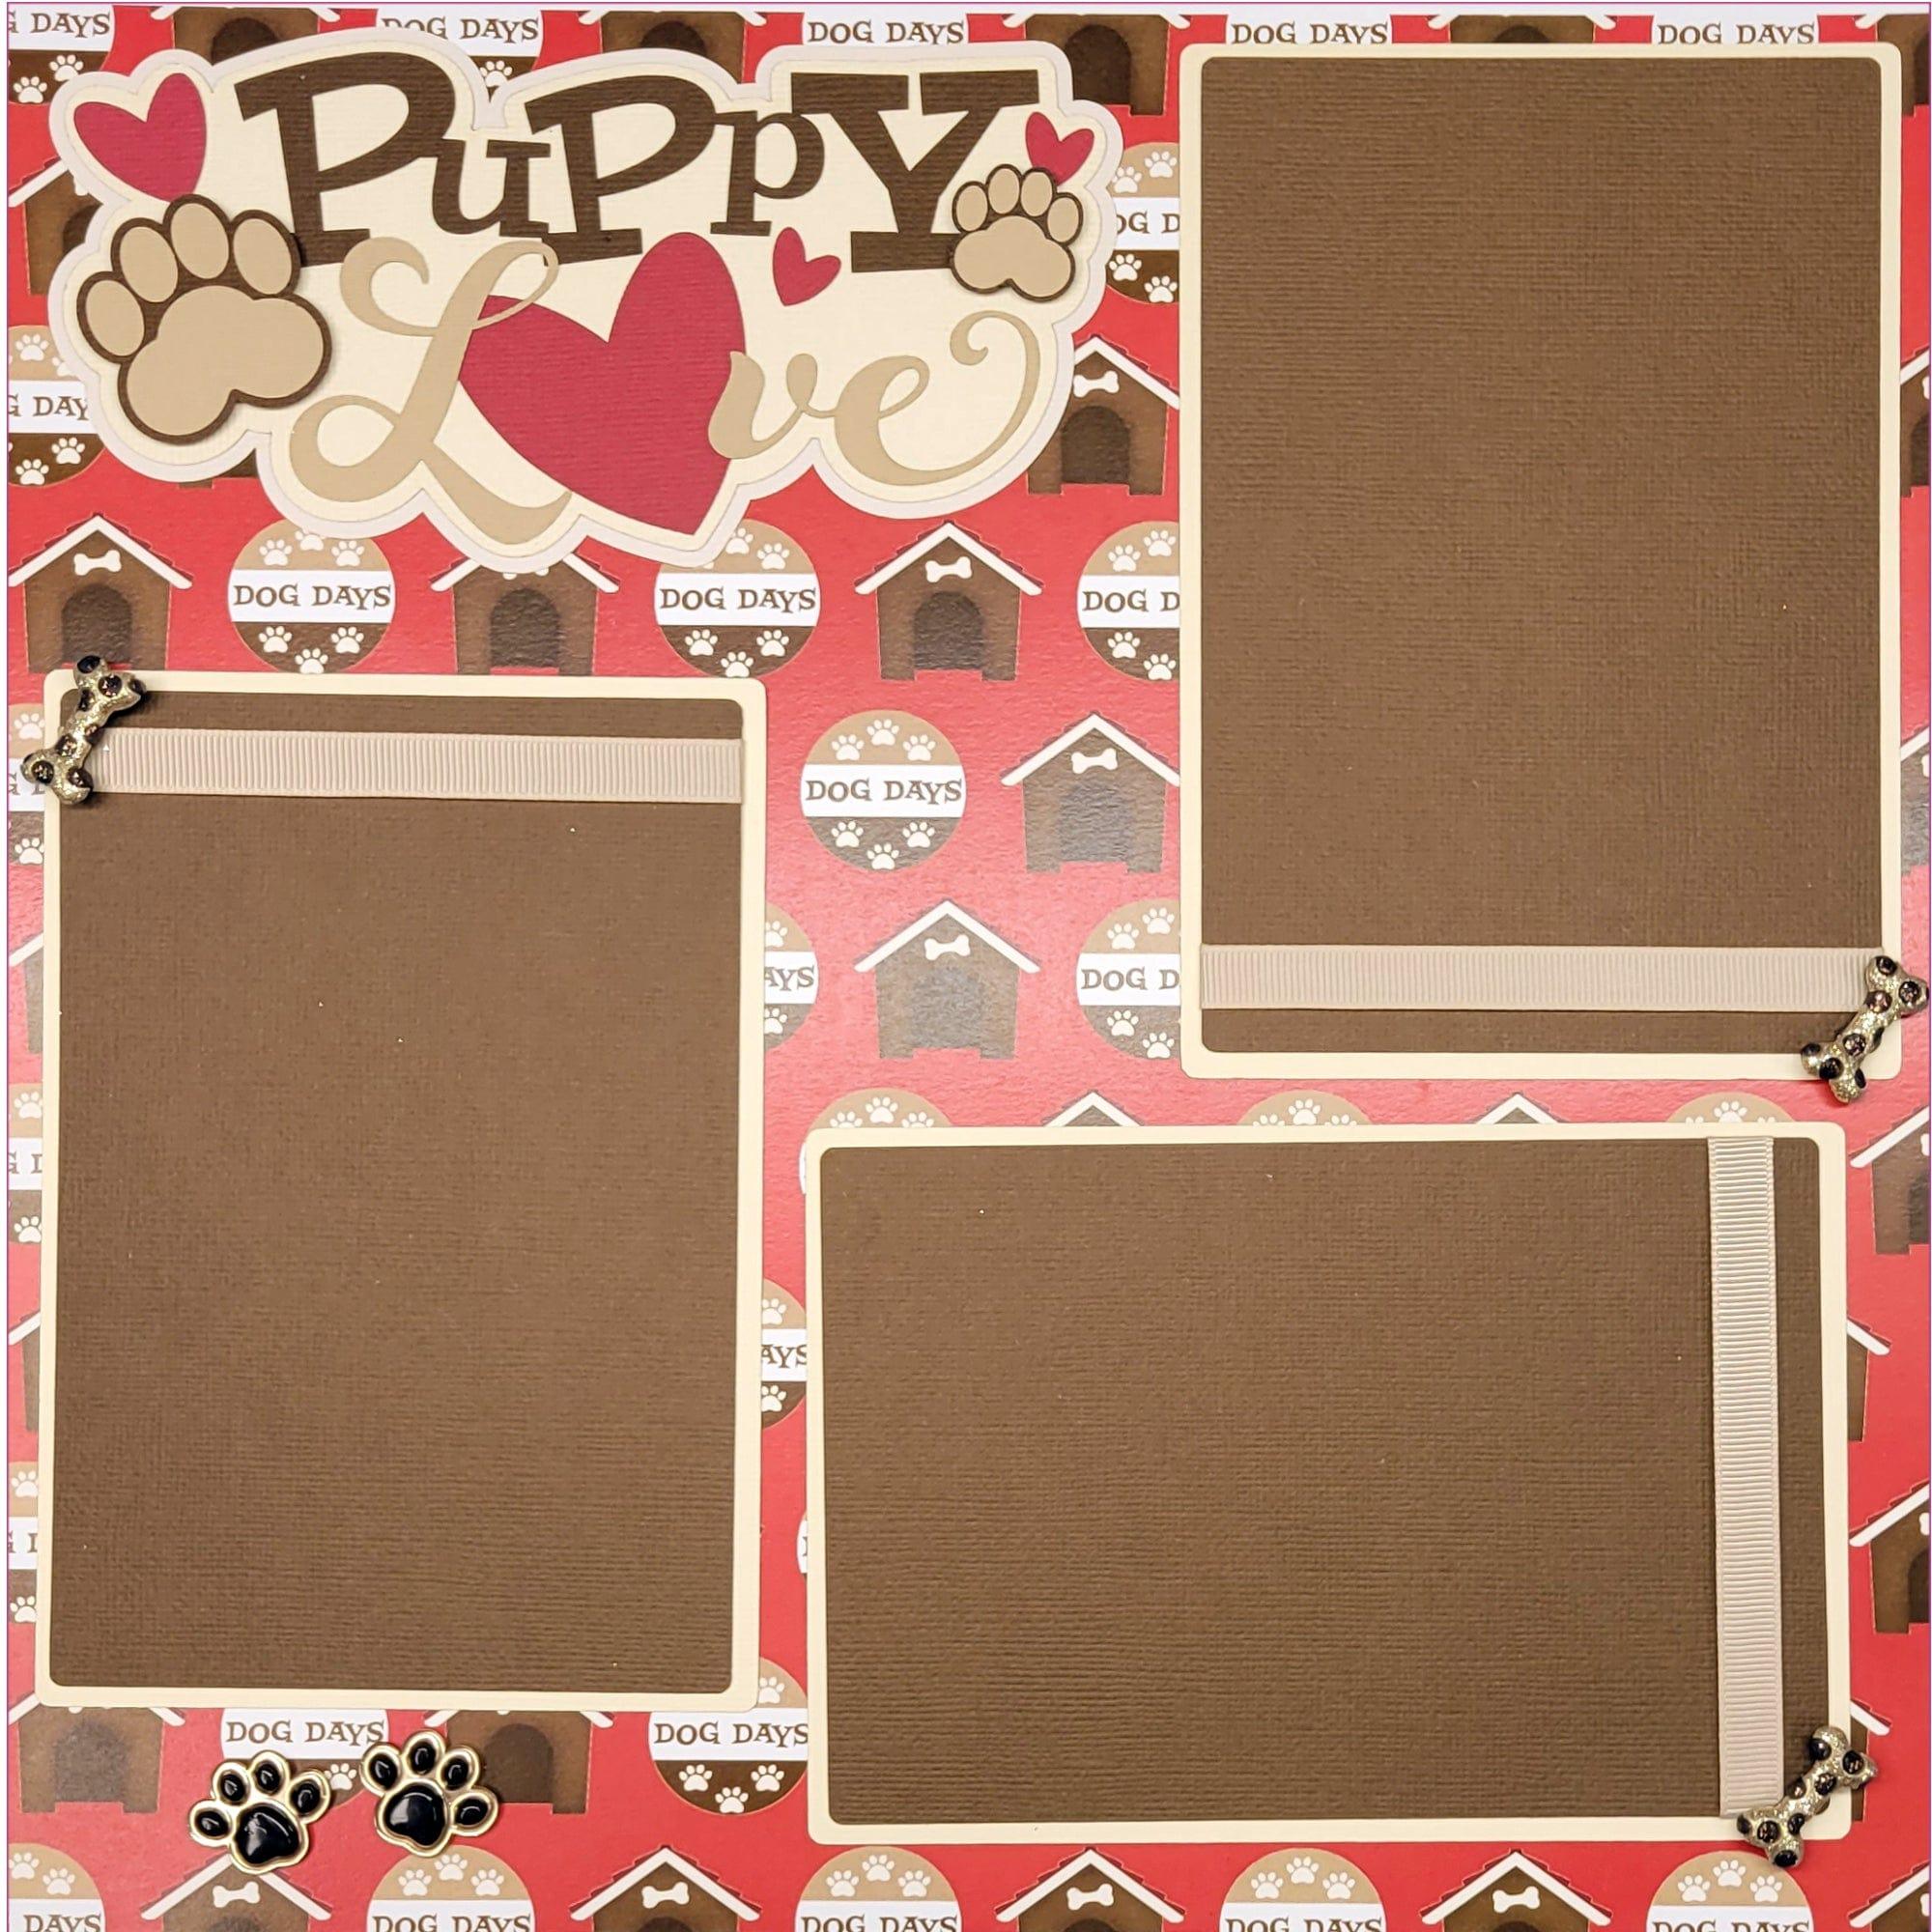 Puppy Love Premade, Hand-Embellished 2- 12 x 12 Scrapbook Page Premades by SSC Designs - Scrapbook Supply Companies